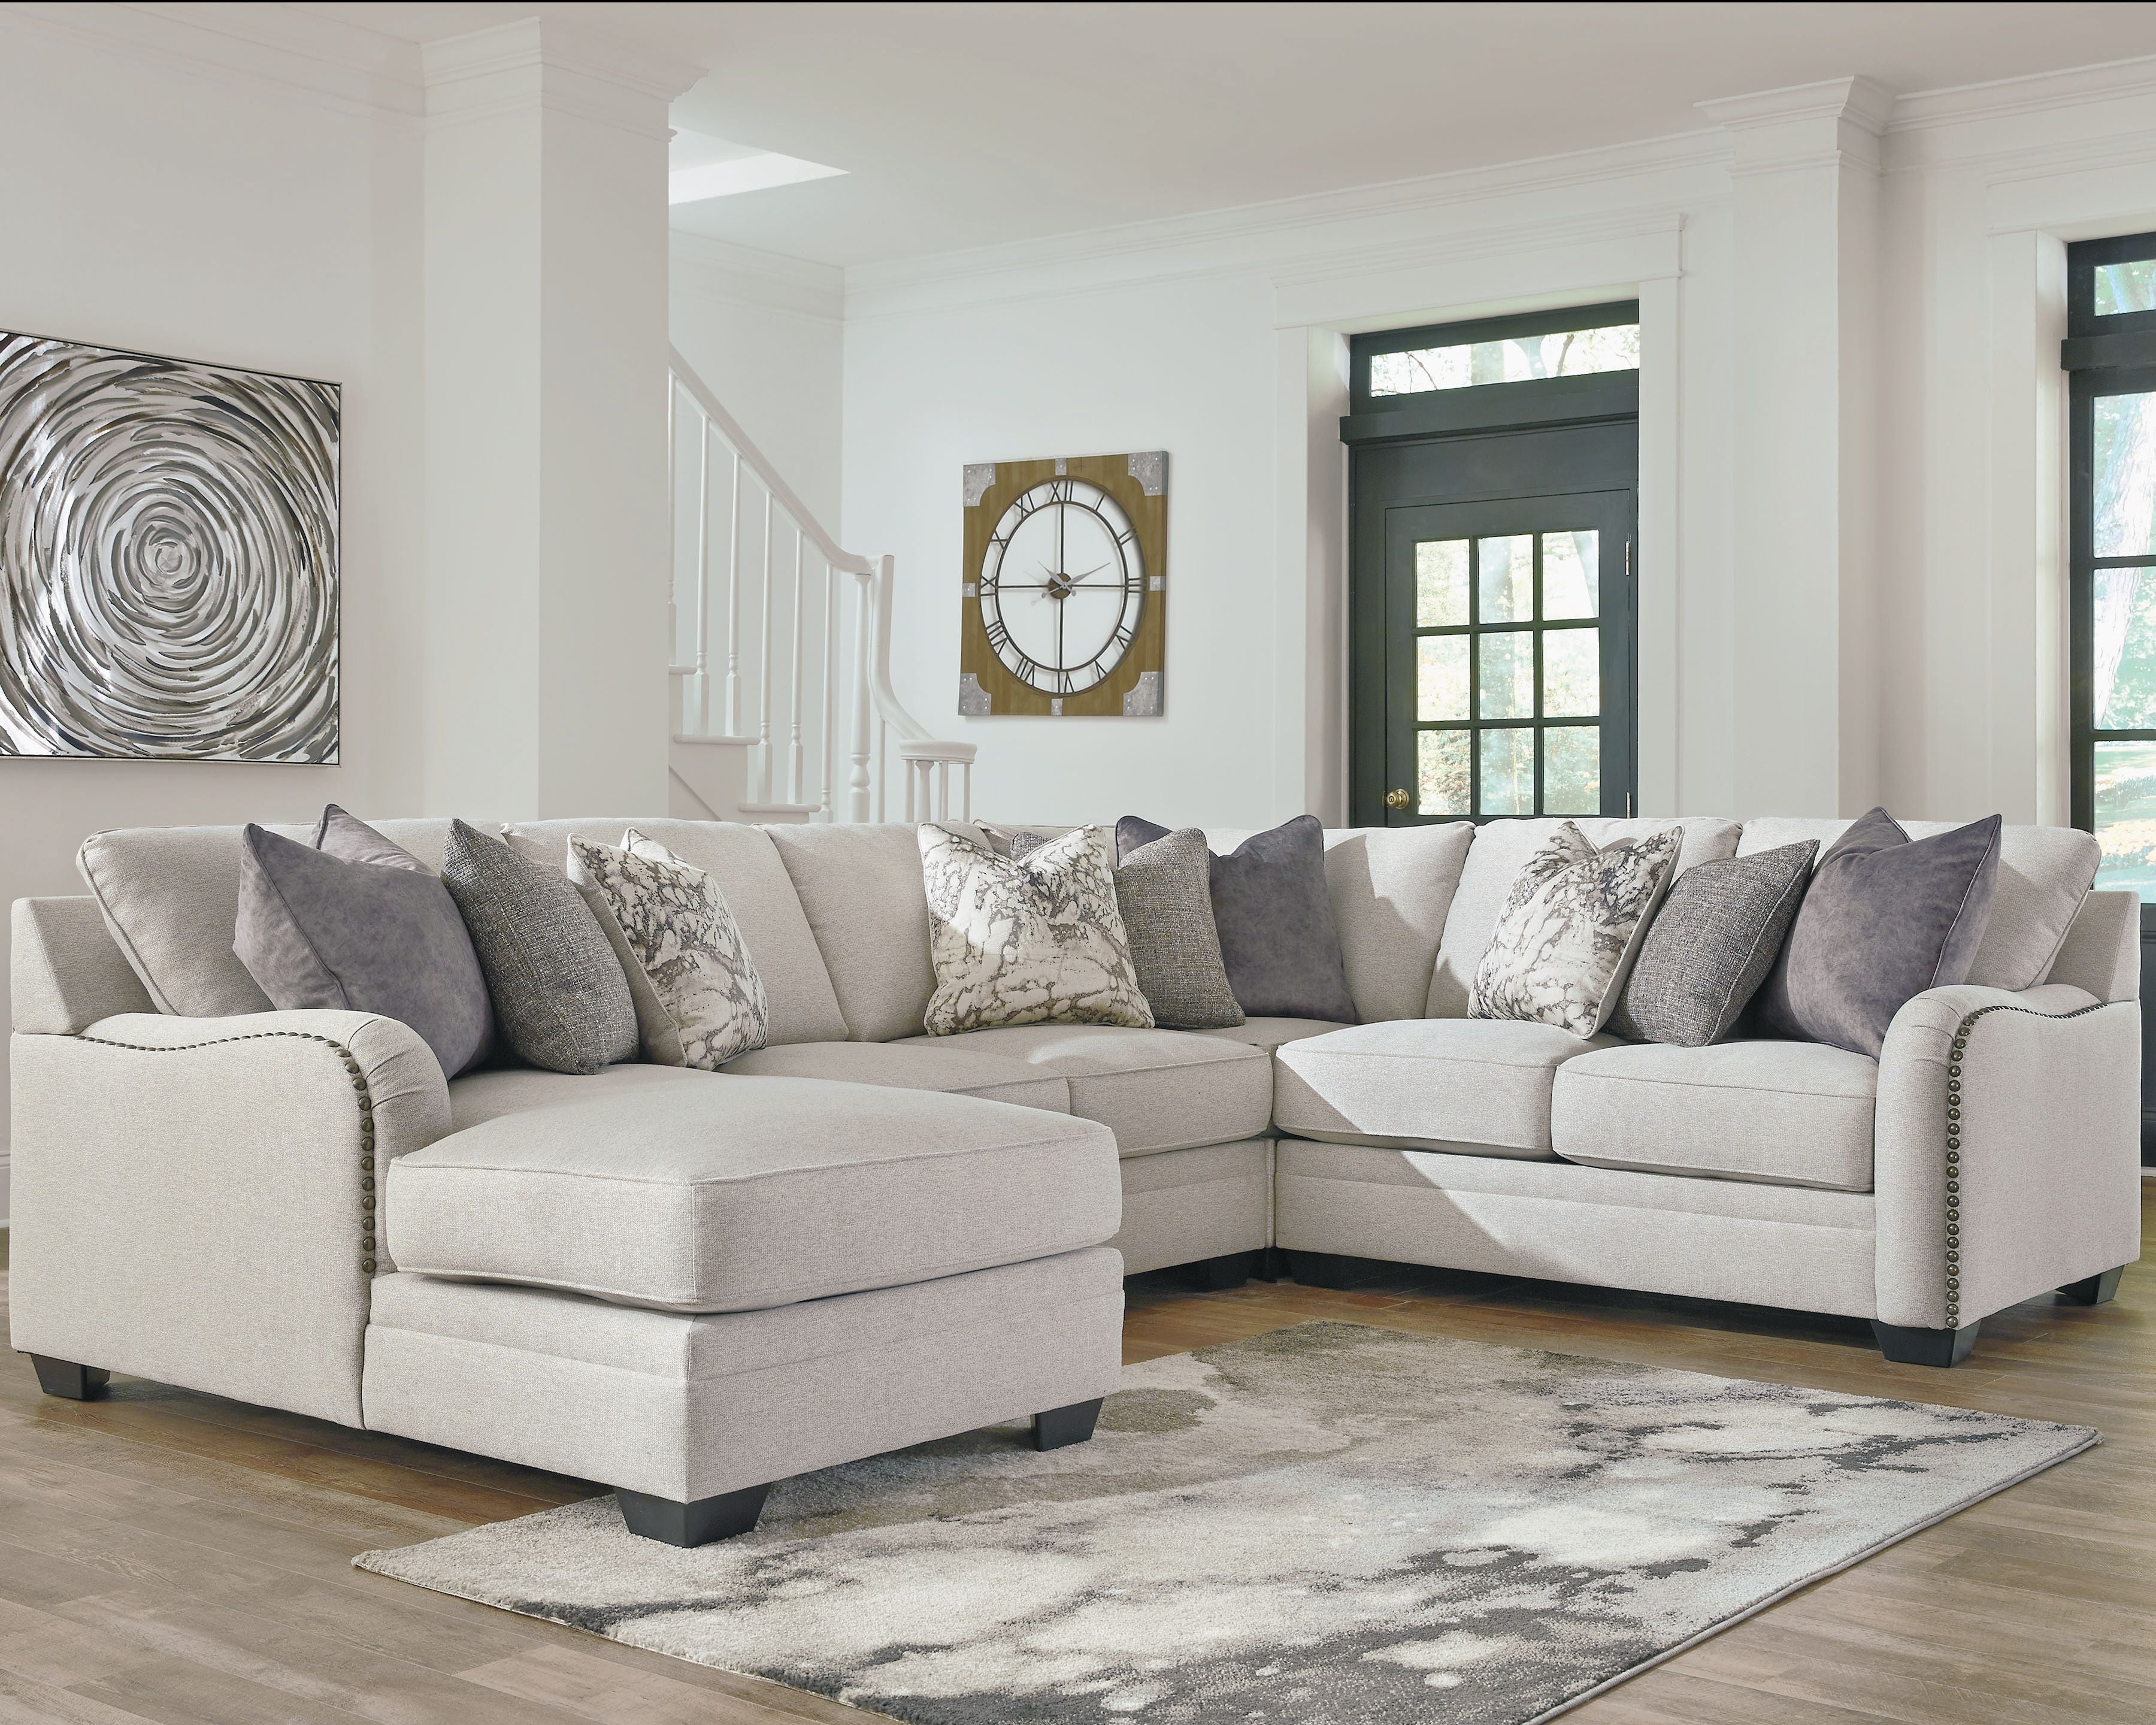 Signature Design by Ashley Dellara Gray Sectional - Transitional, Chic, Comfy